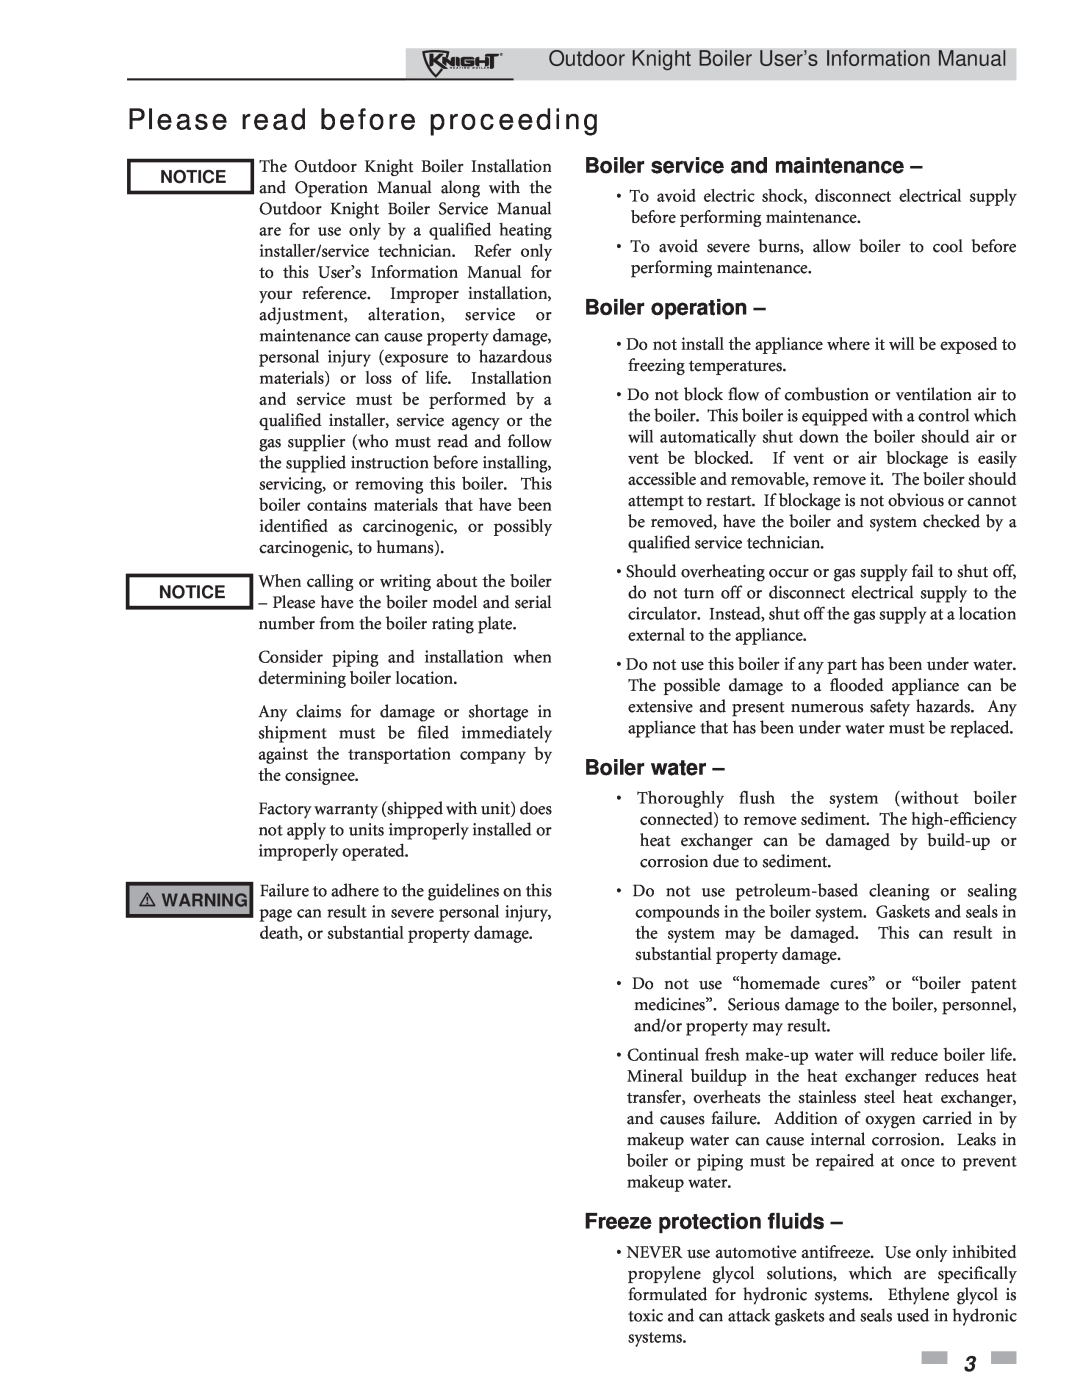 Lochinvar 286, 151 manual Please read before proceeding, Outdoor Knight Boiler User’s Information Manual, Boiler operation 